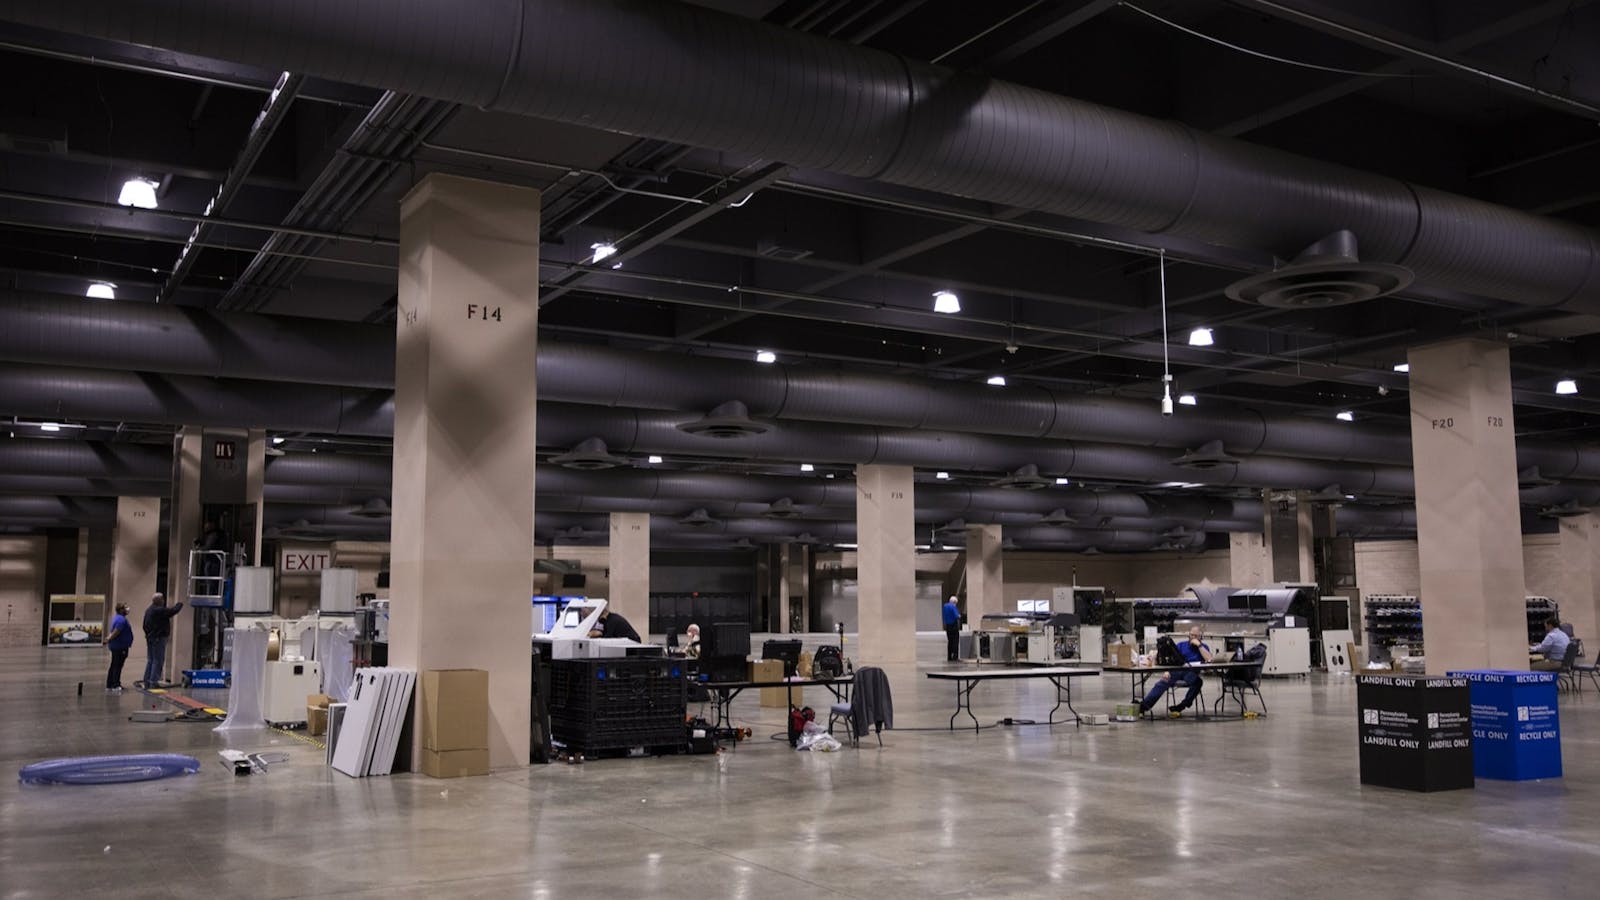 Ballot-counting equipment at the Philadelphia Convention Center in September. Photo by Bloomberg